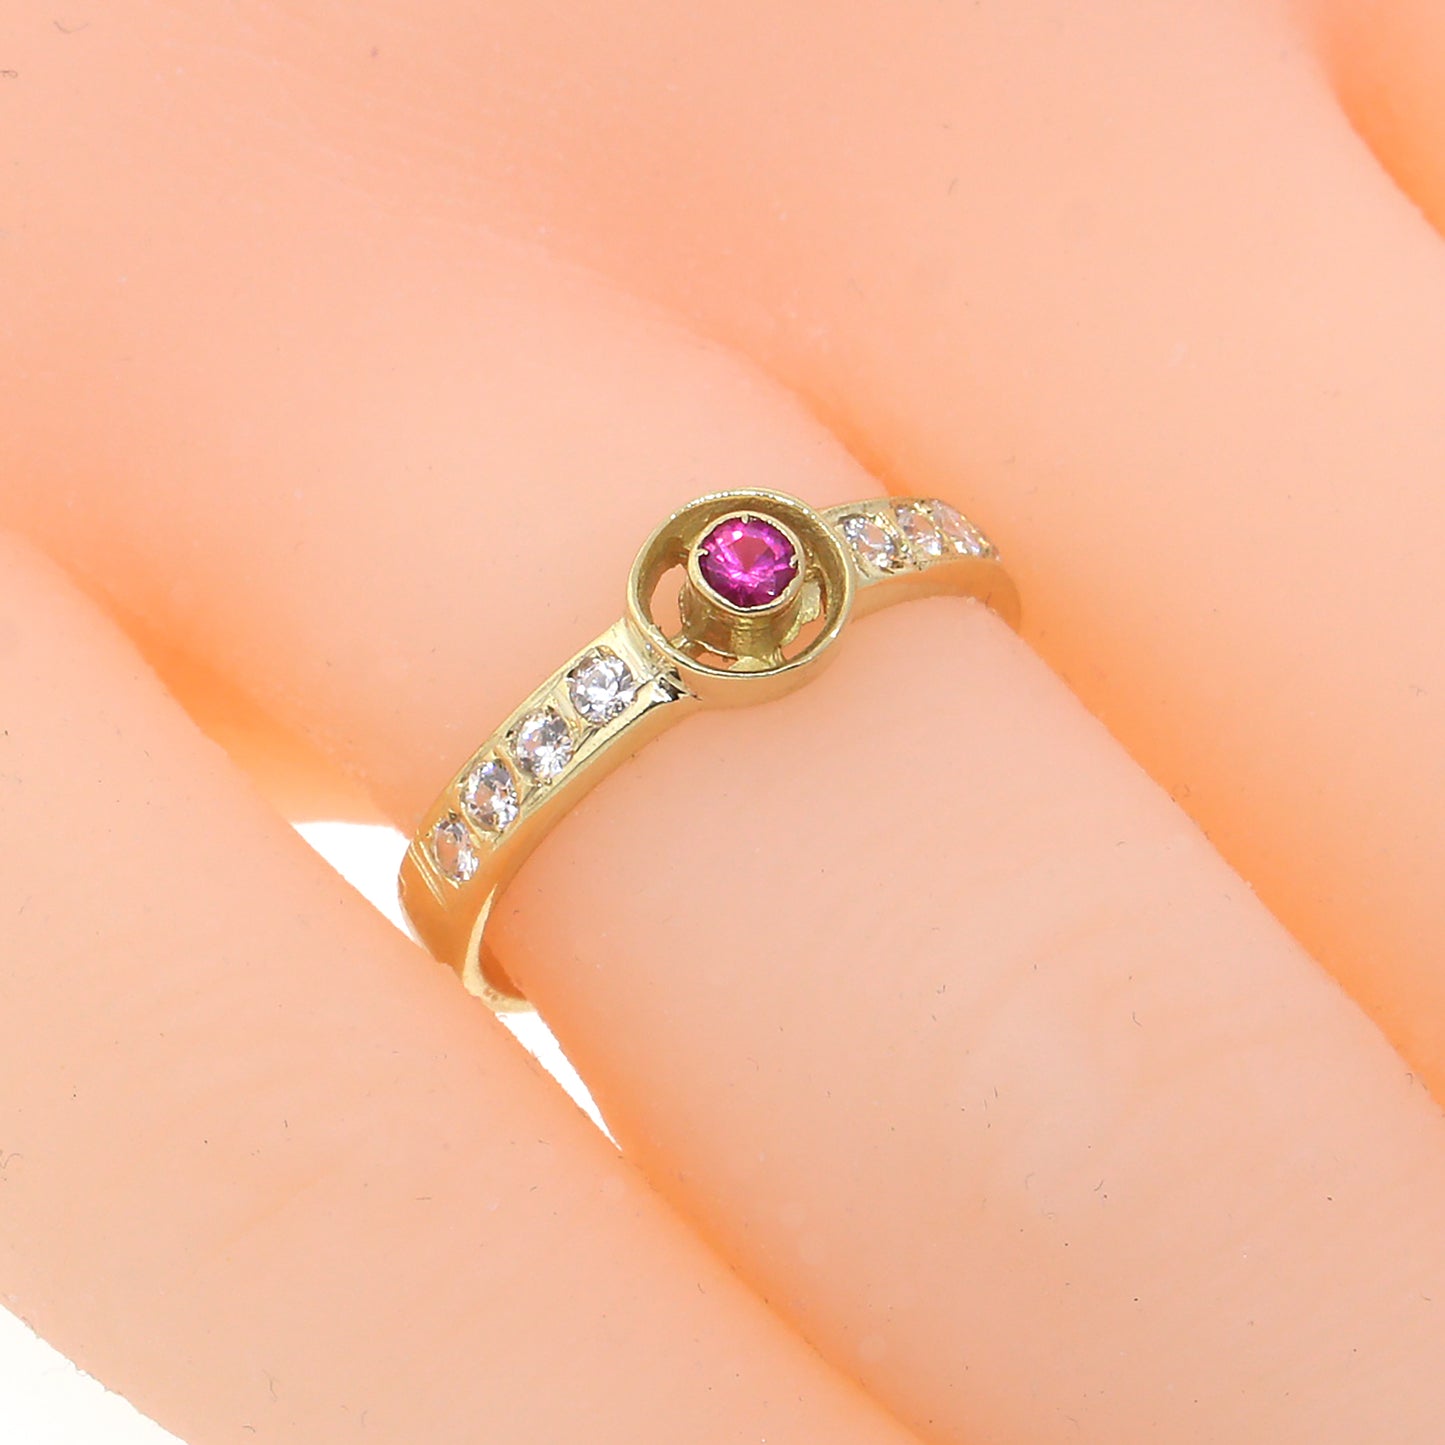 Ruby and Diamond Ring 14k Yellow Gold